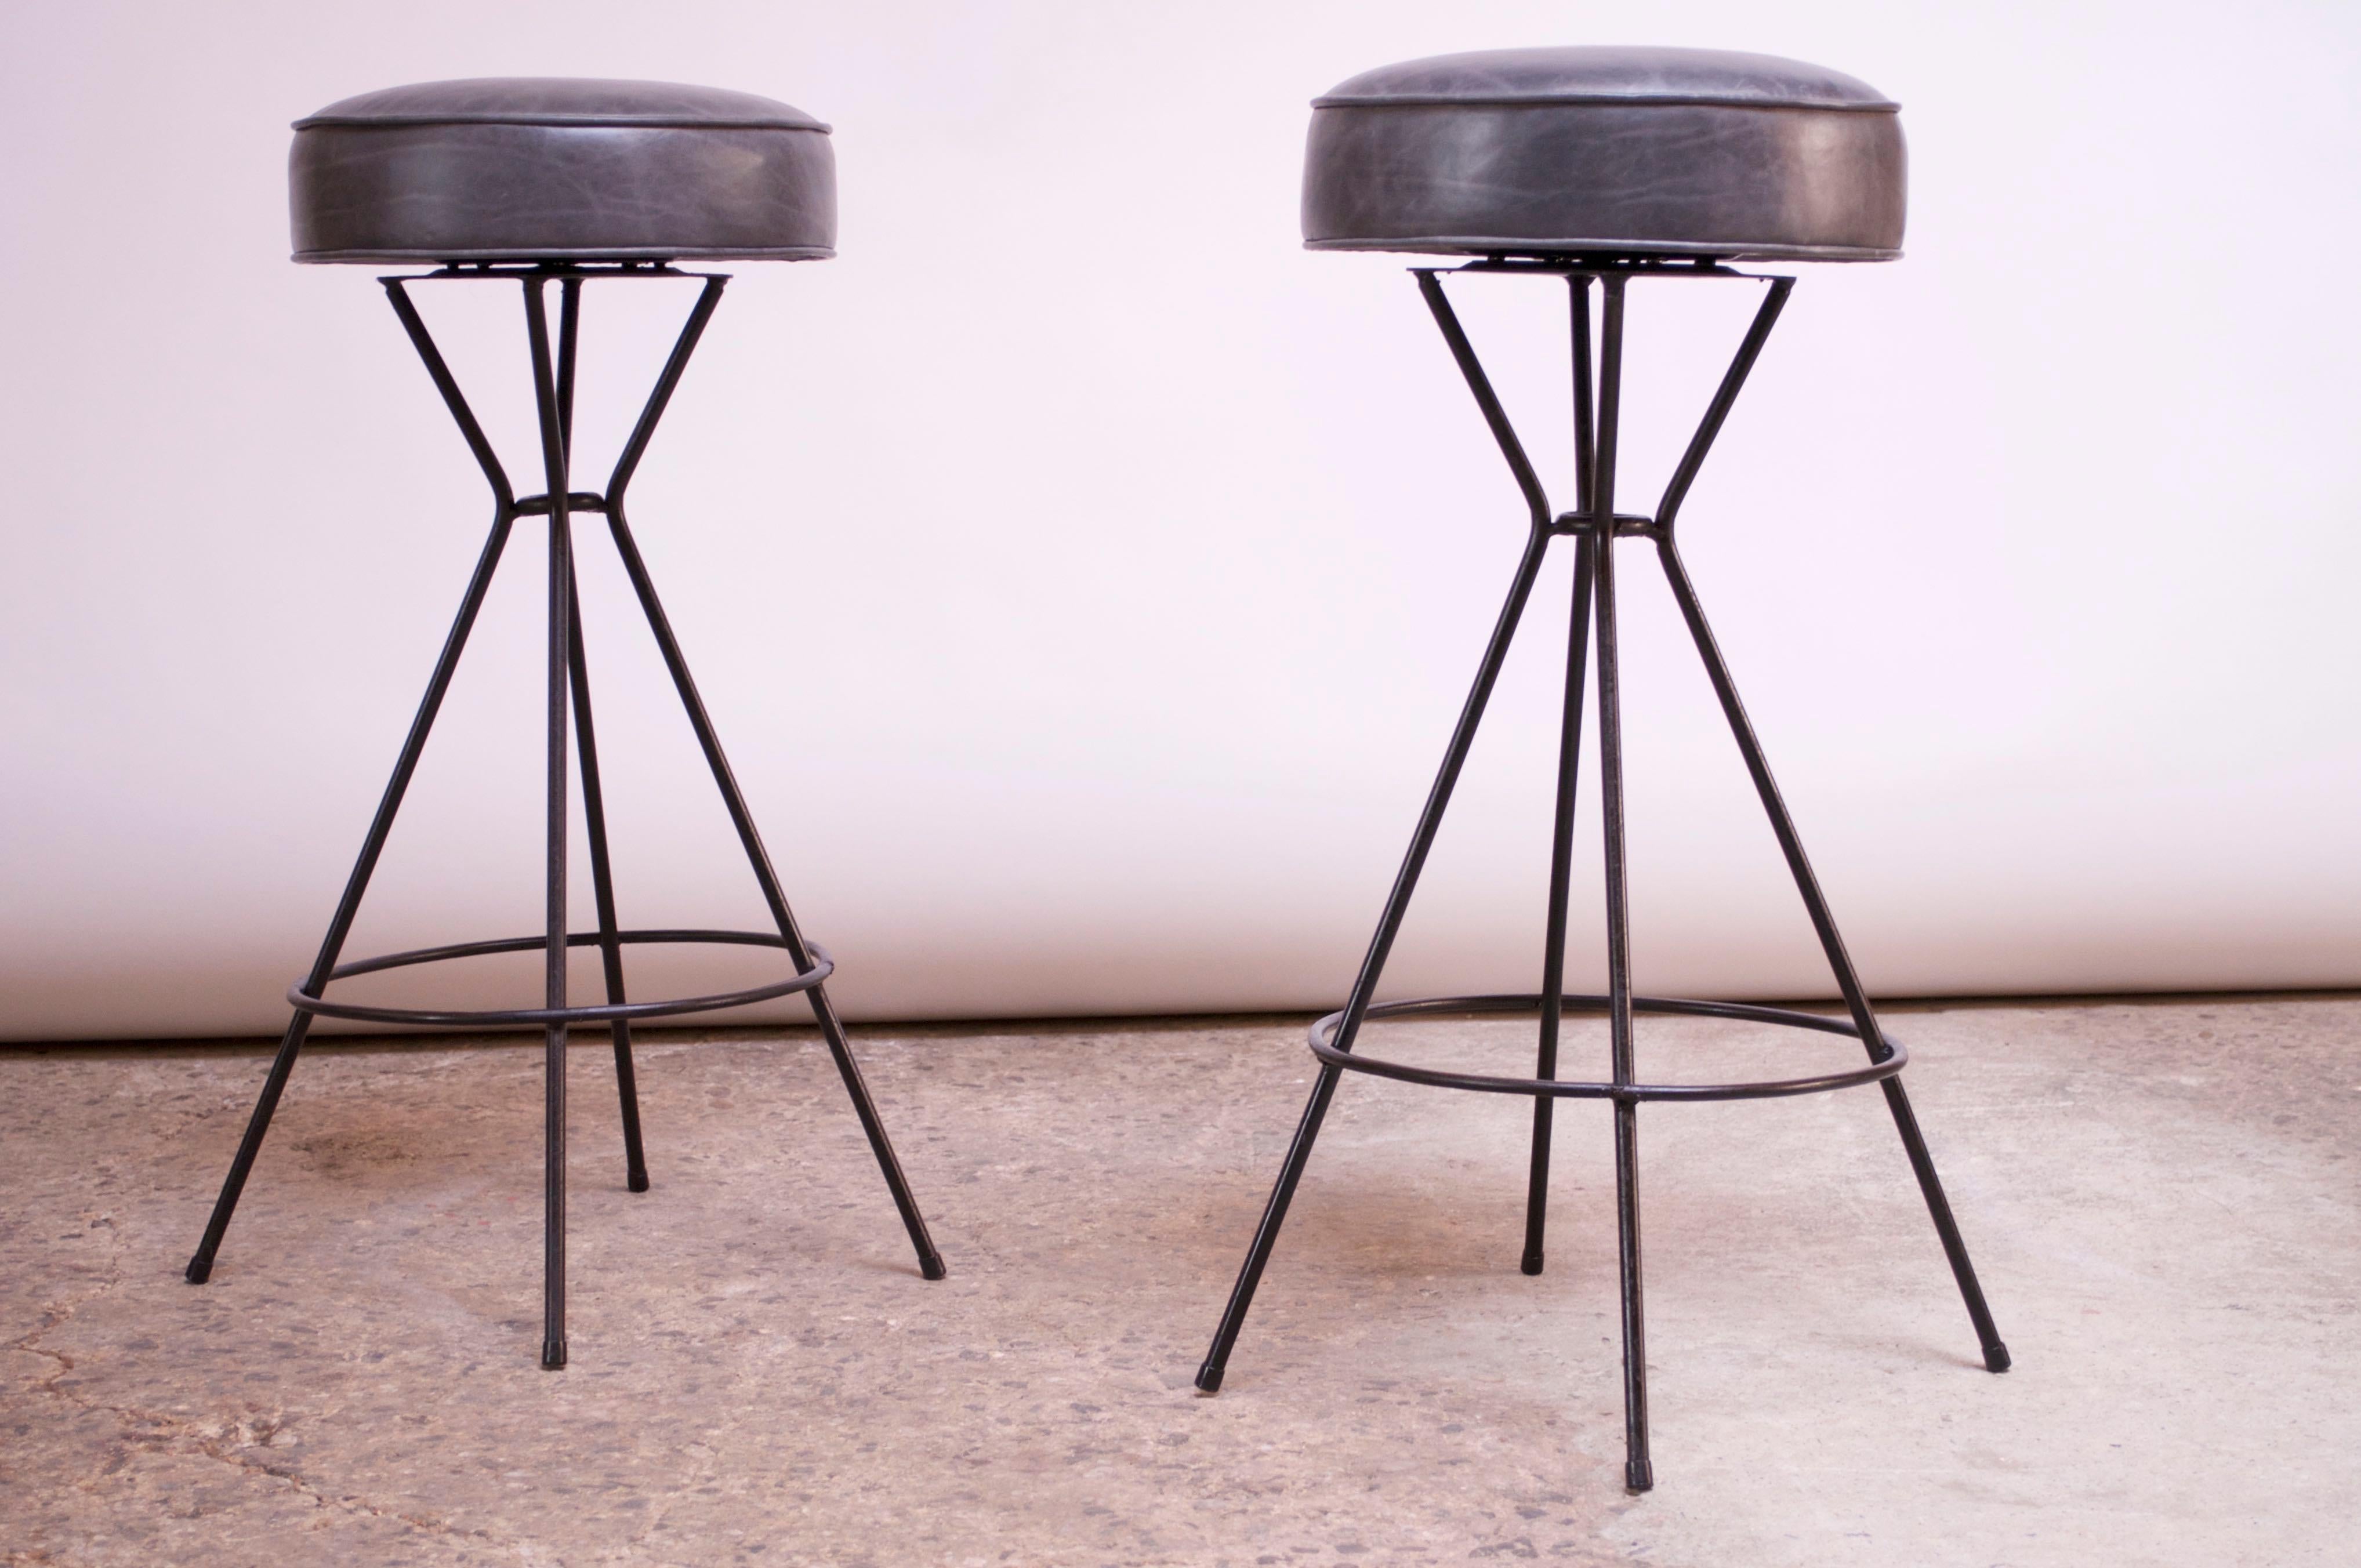 American Pair of Mid-Century Modern Wrought Iron and Leather Swivel Bar Stools